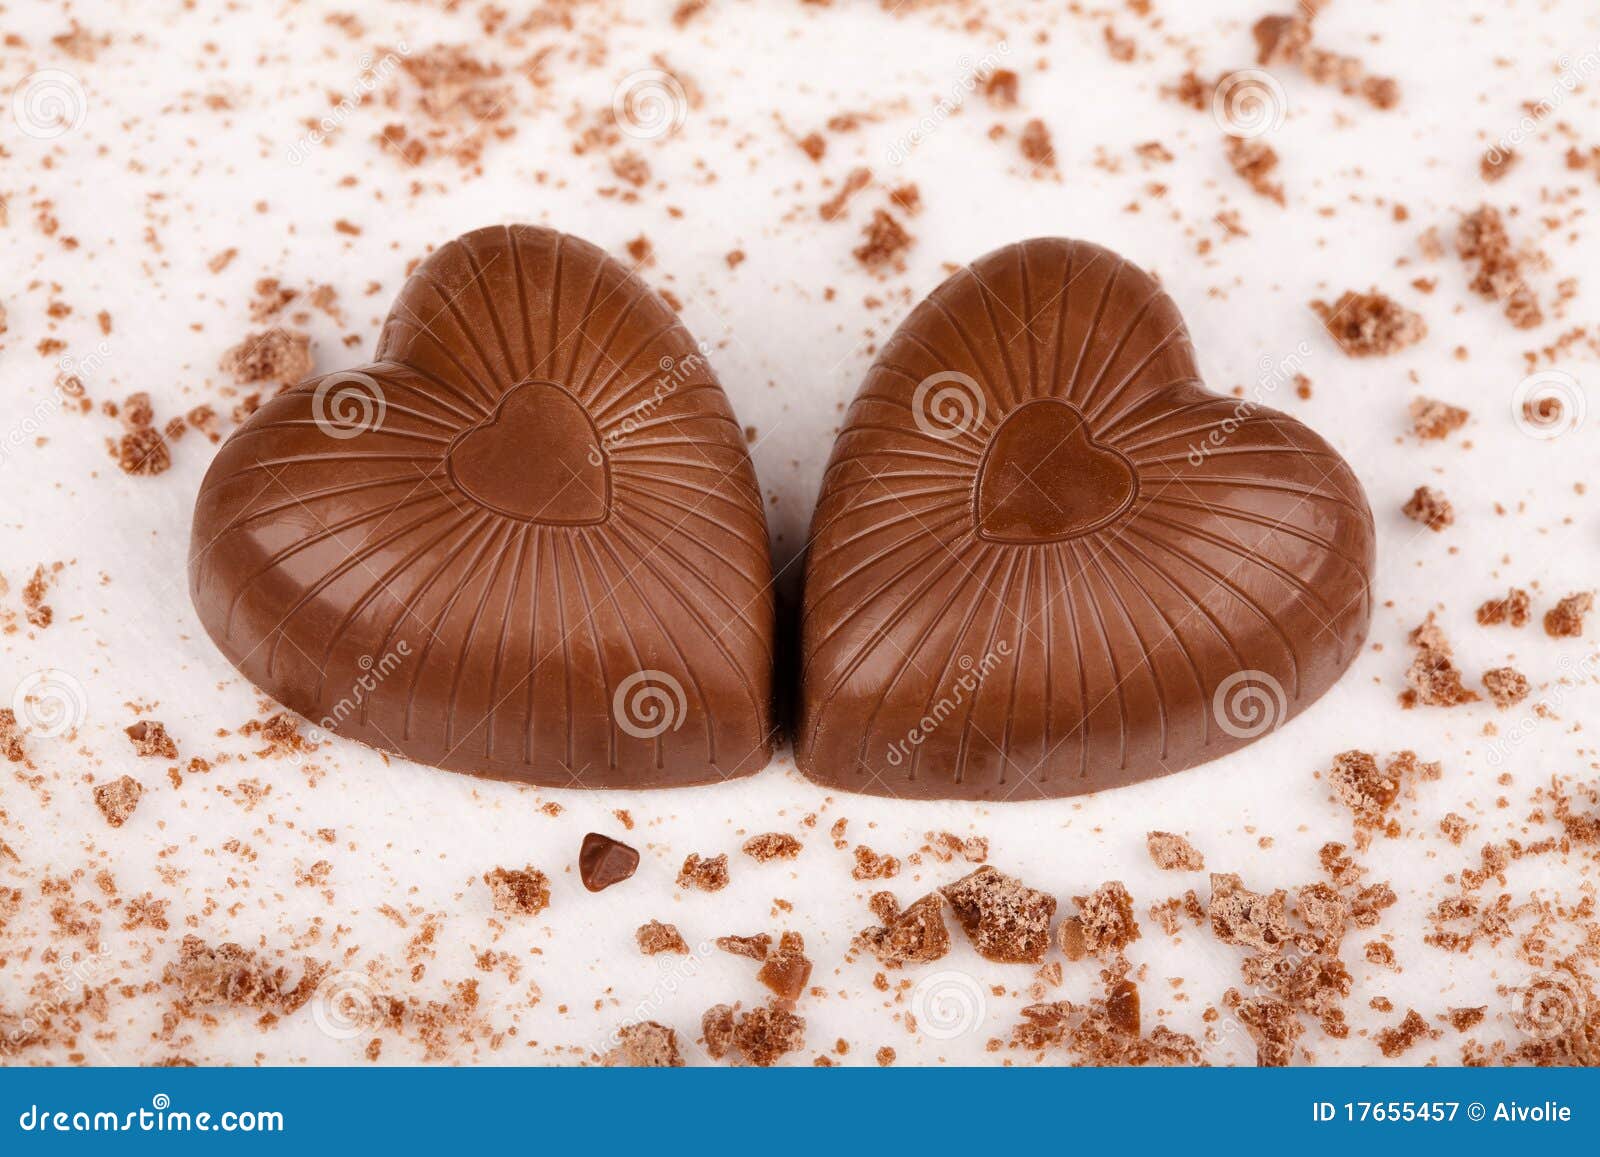 Two Chocolate Hearts with Crumbs Stock Image - Image of delicious ...